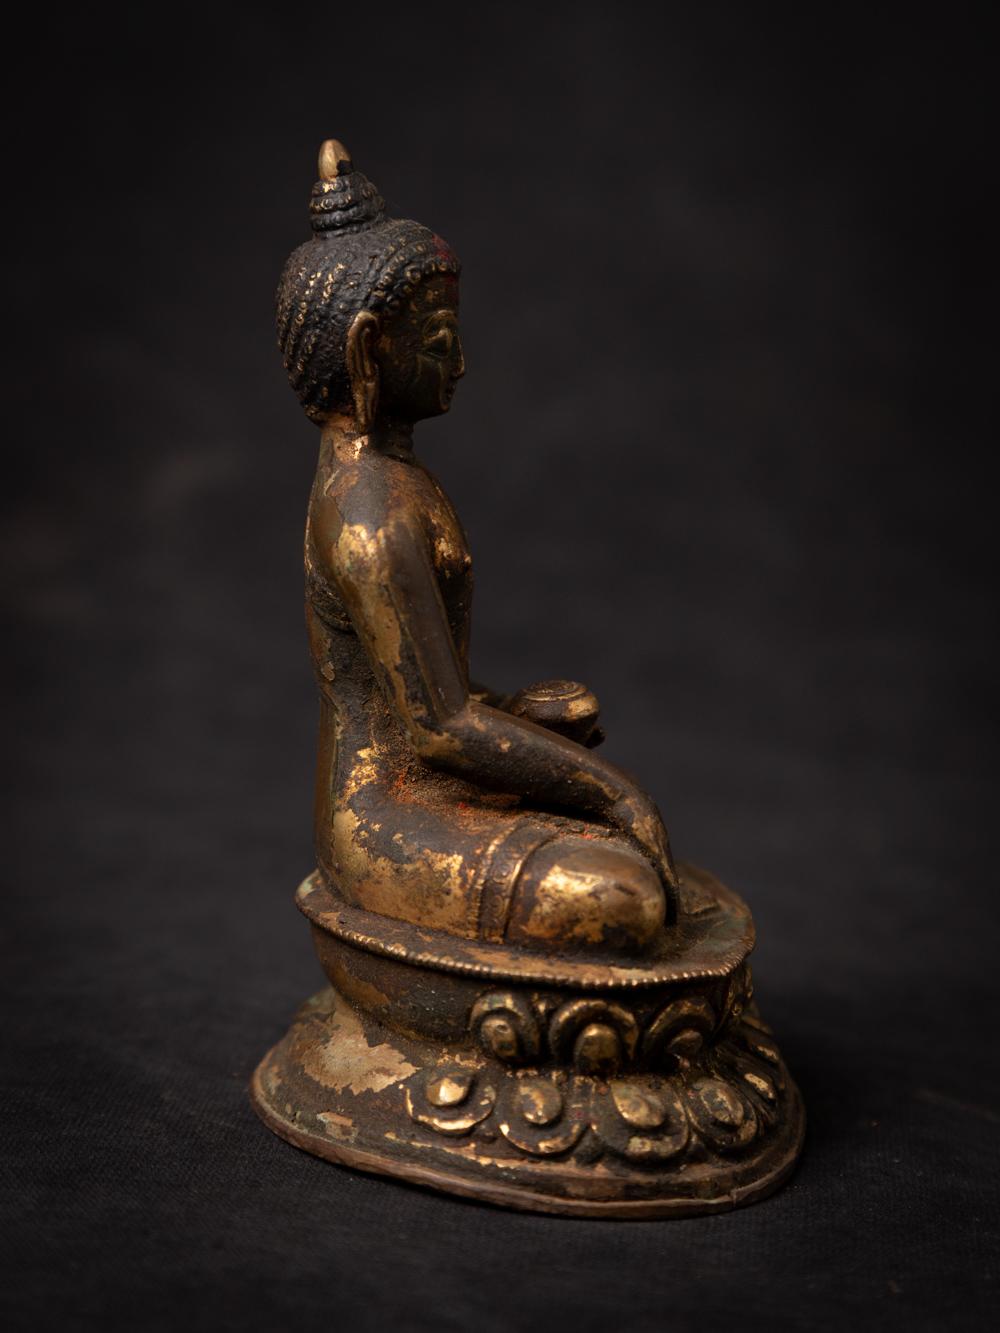 The antique bronze Nepali Buddha statue is a captivating and spiritually significant artifact originating from Nepal. Crafted from bronze and adorned with fire gilding in 24-karat gold, this statue stands at 12.8 cm in height and measures 9.8 cm in